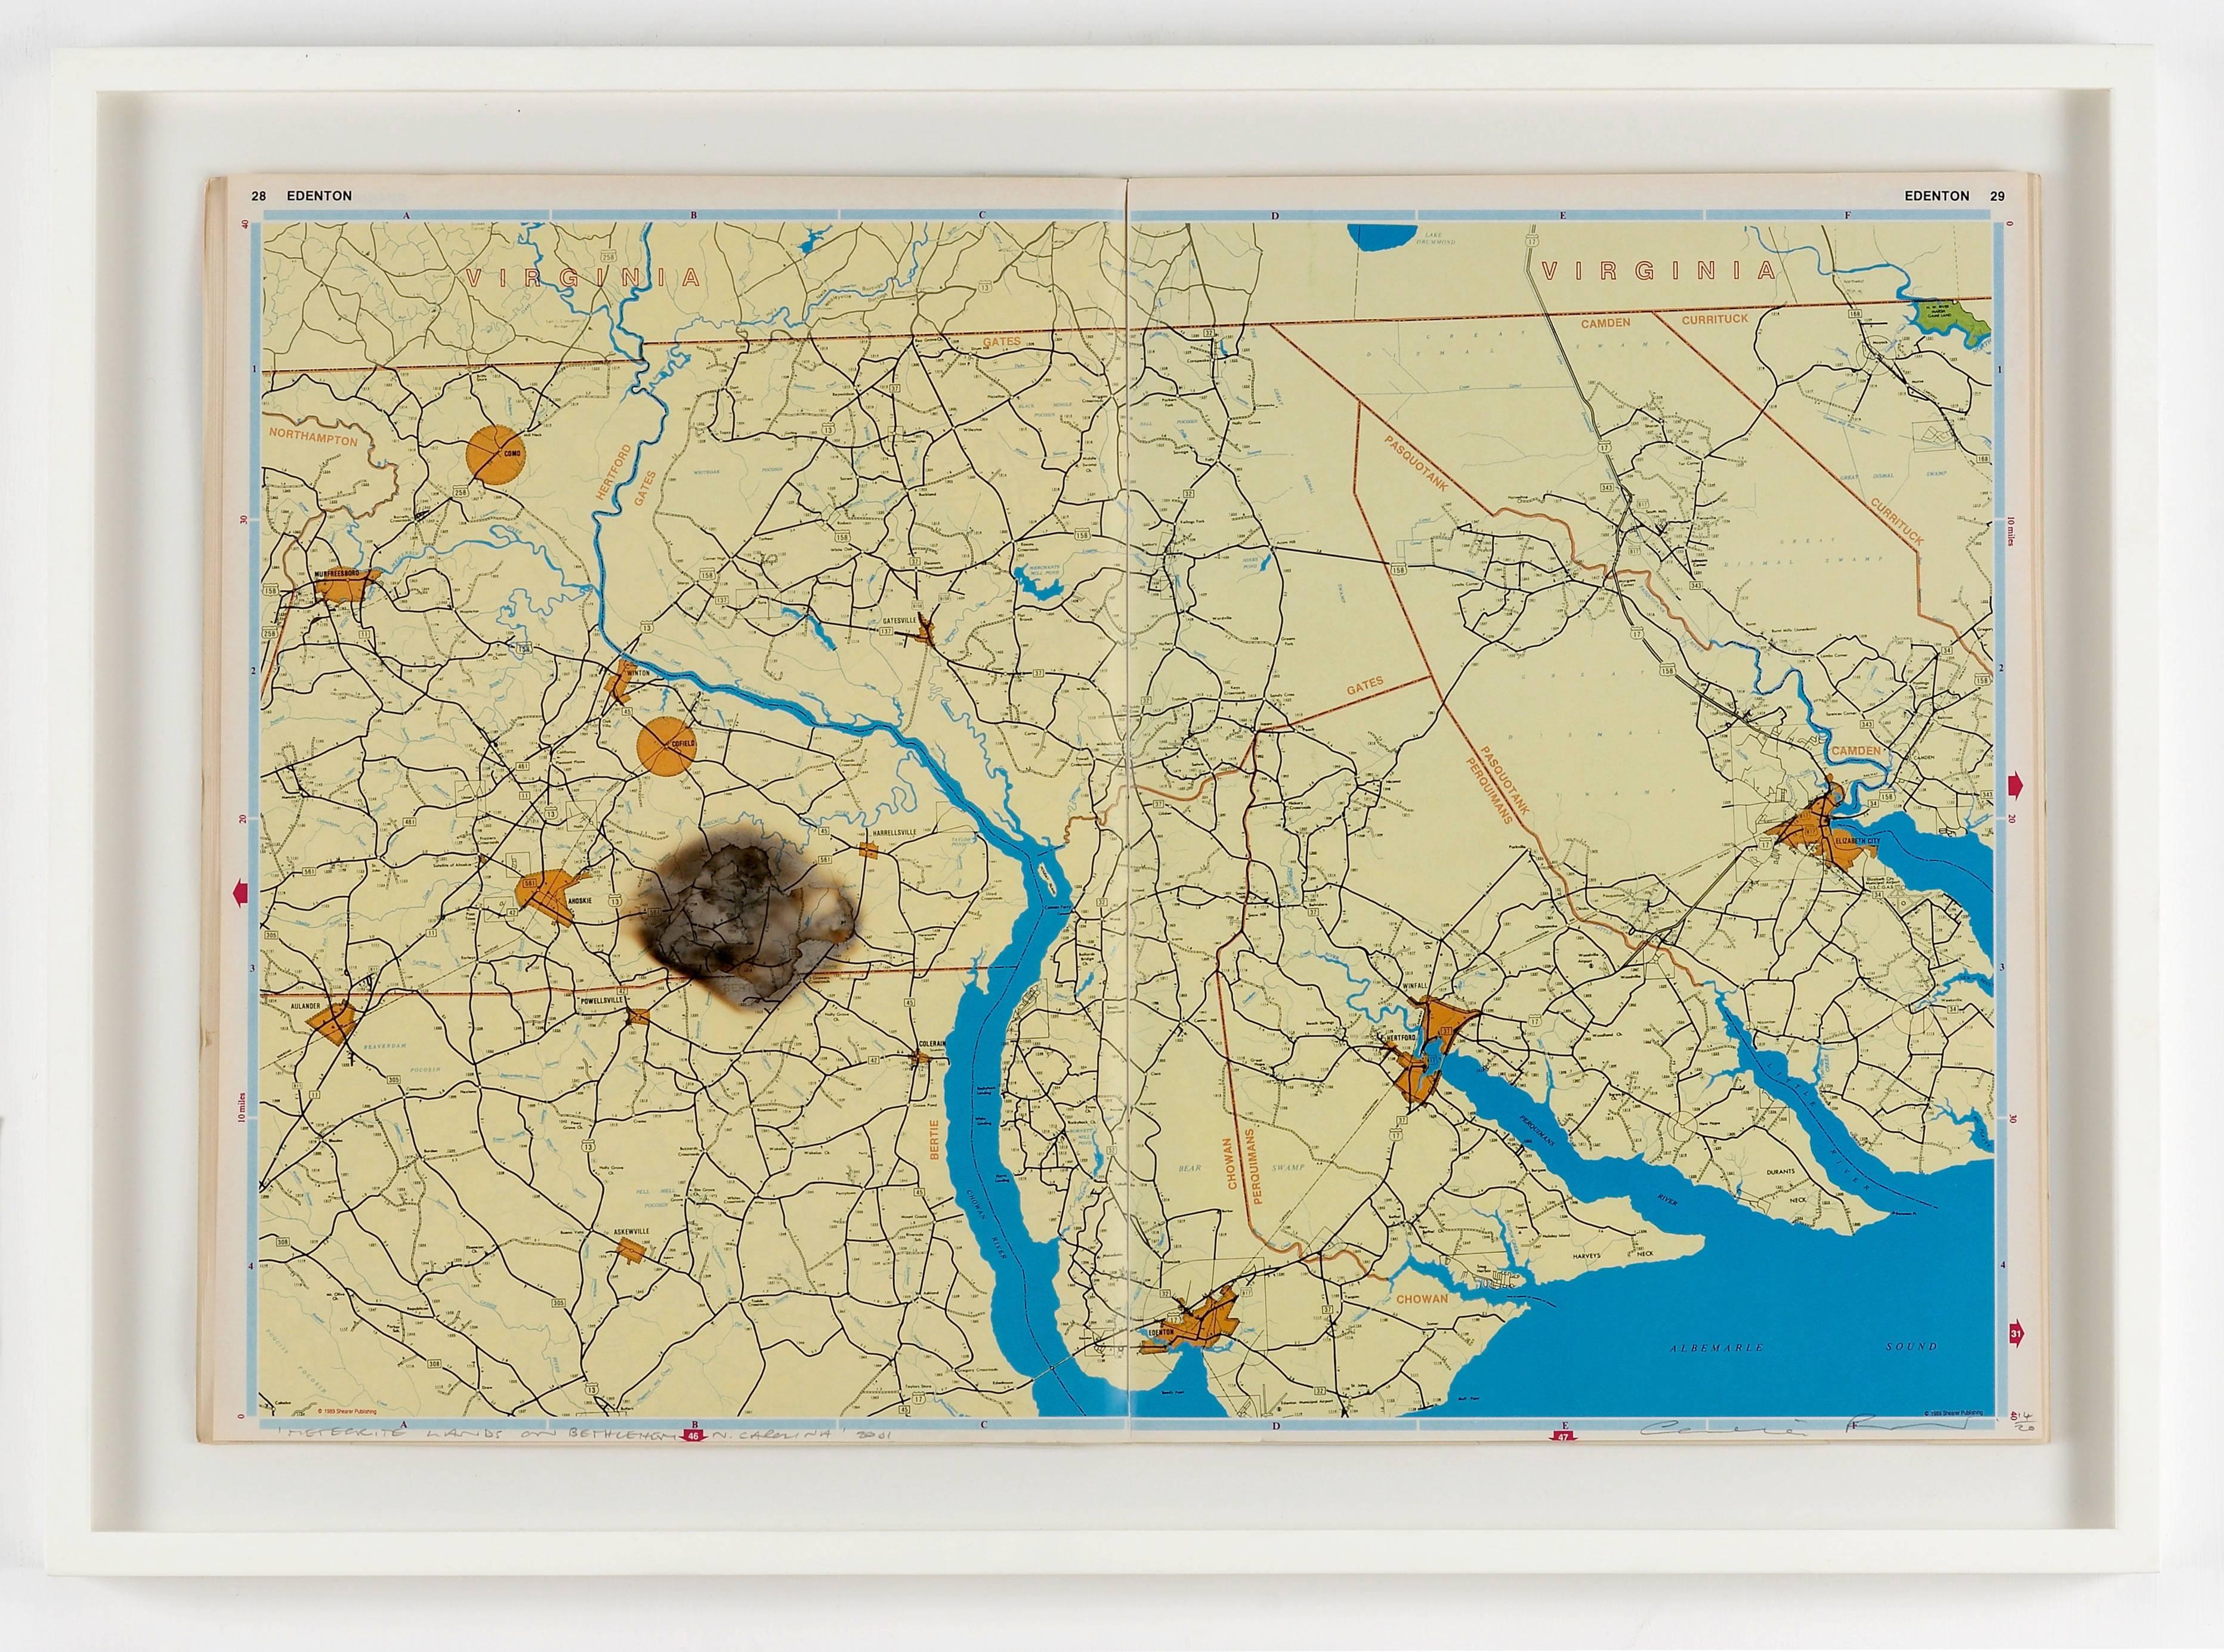 Meteorite Lands In The Middle Of Nowhere - Mixed Media Art by Cornelia Parker